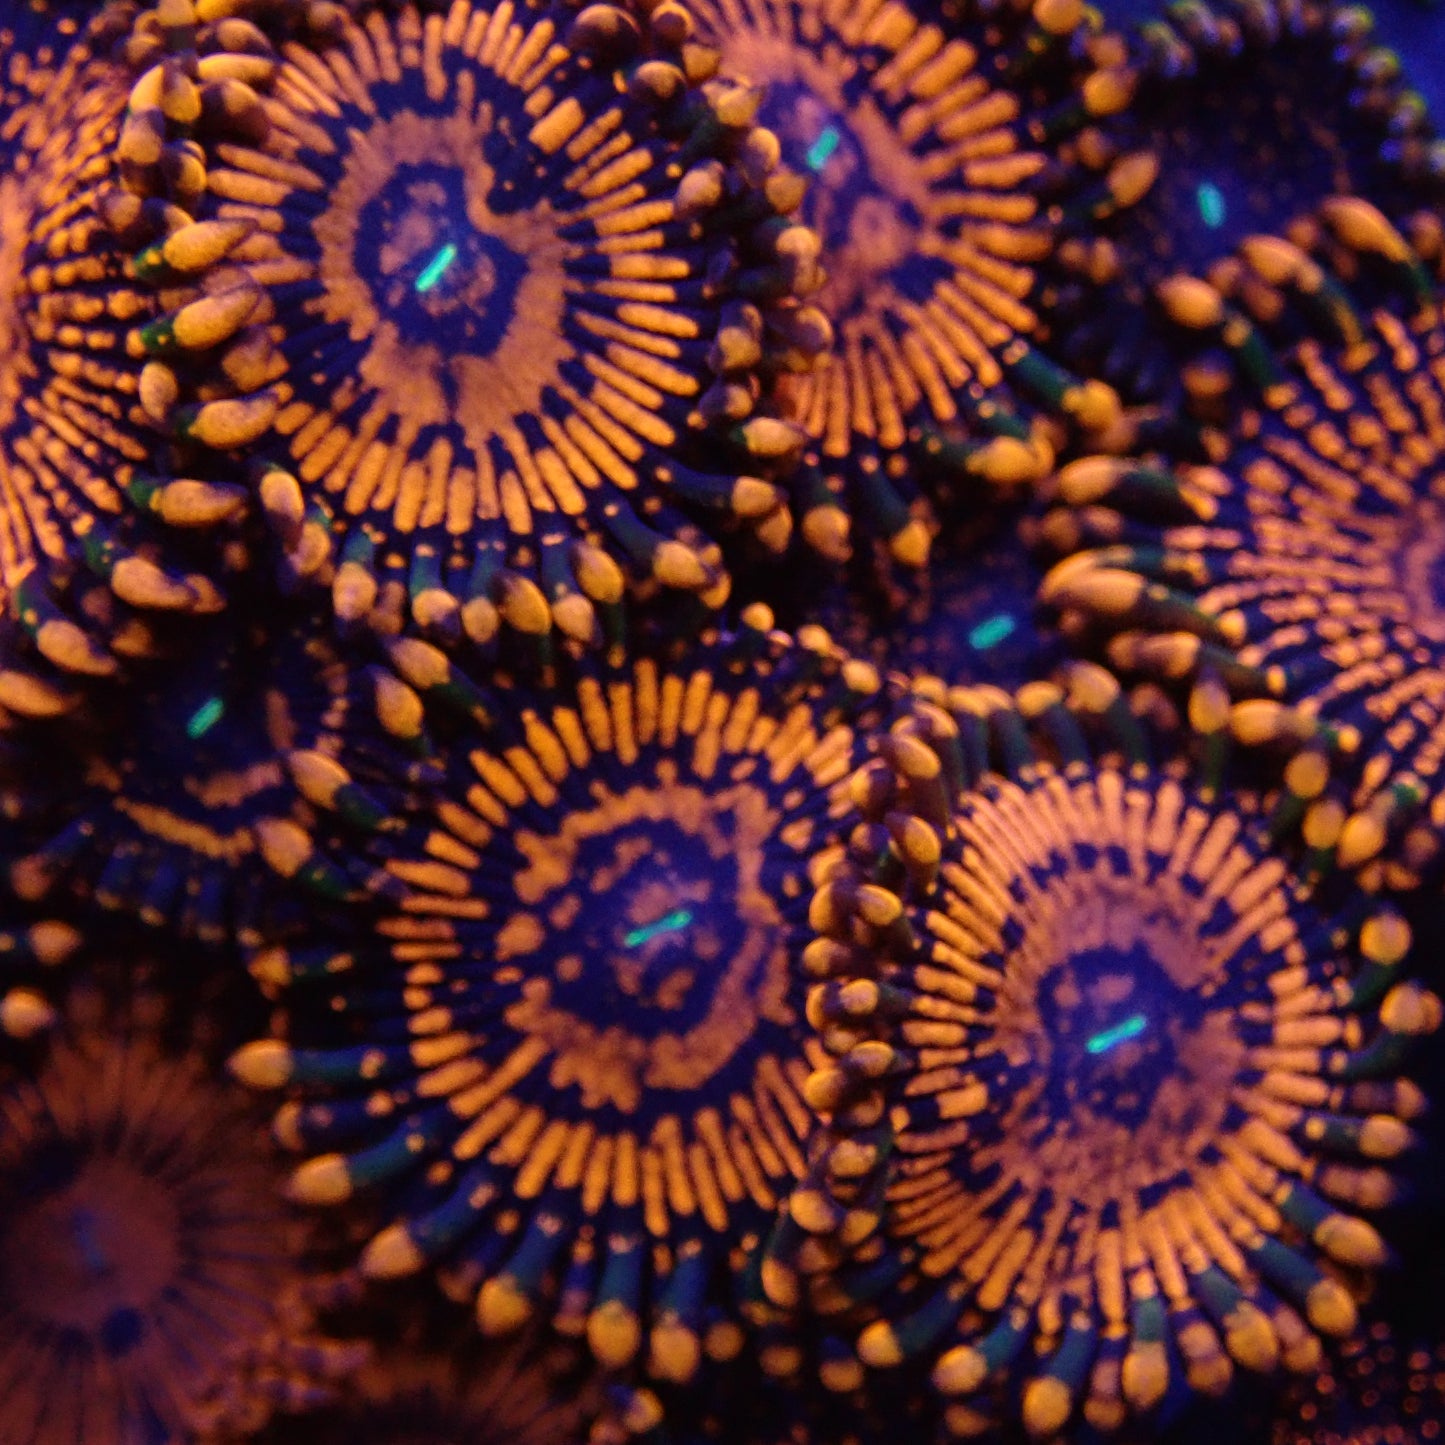 Flaming Mohican Zoanthids